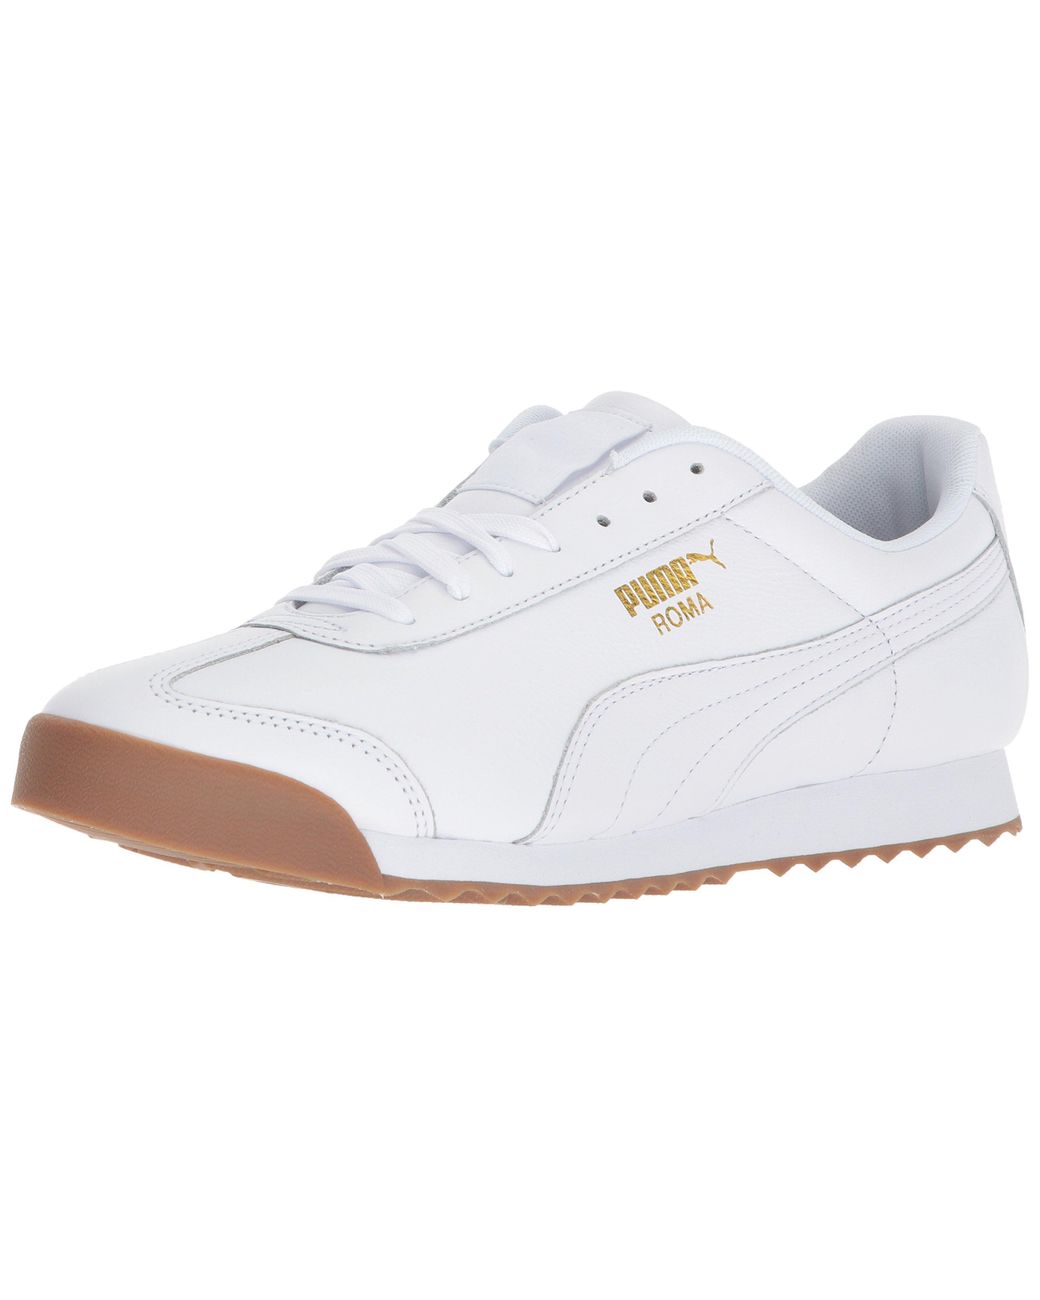 PUMA Leather Roma Classic Gum in White for Men - Save 59% - Lyst